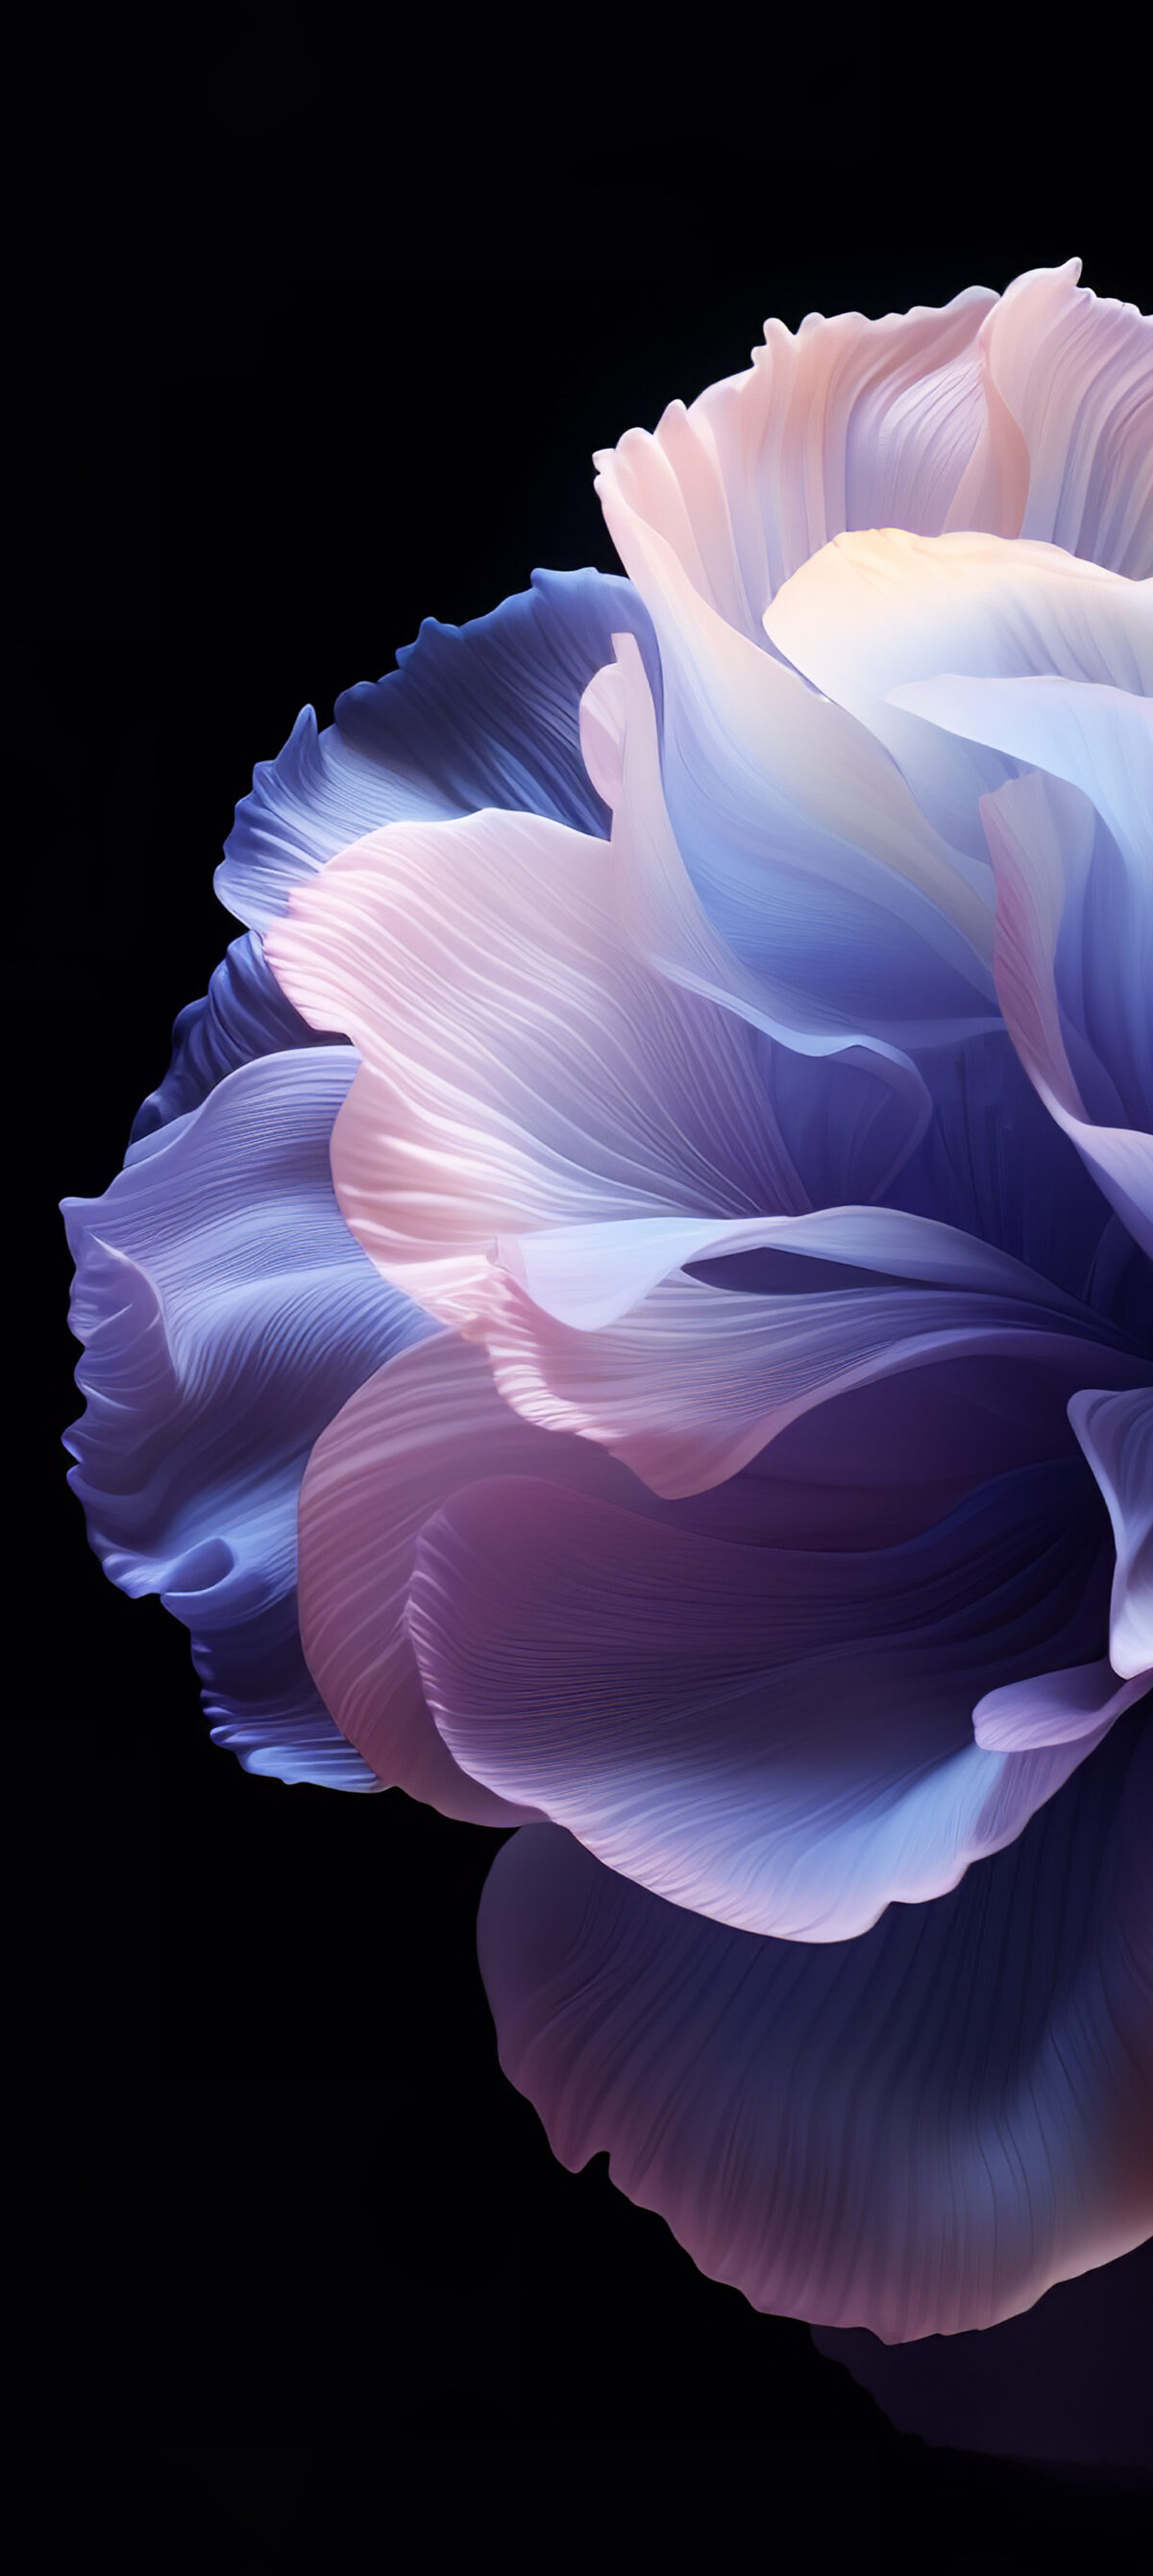 OPPO ColorOS 14 Stock Wallpaper 2 - Wallpapers Central